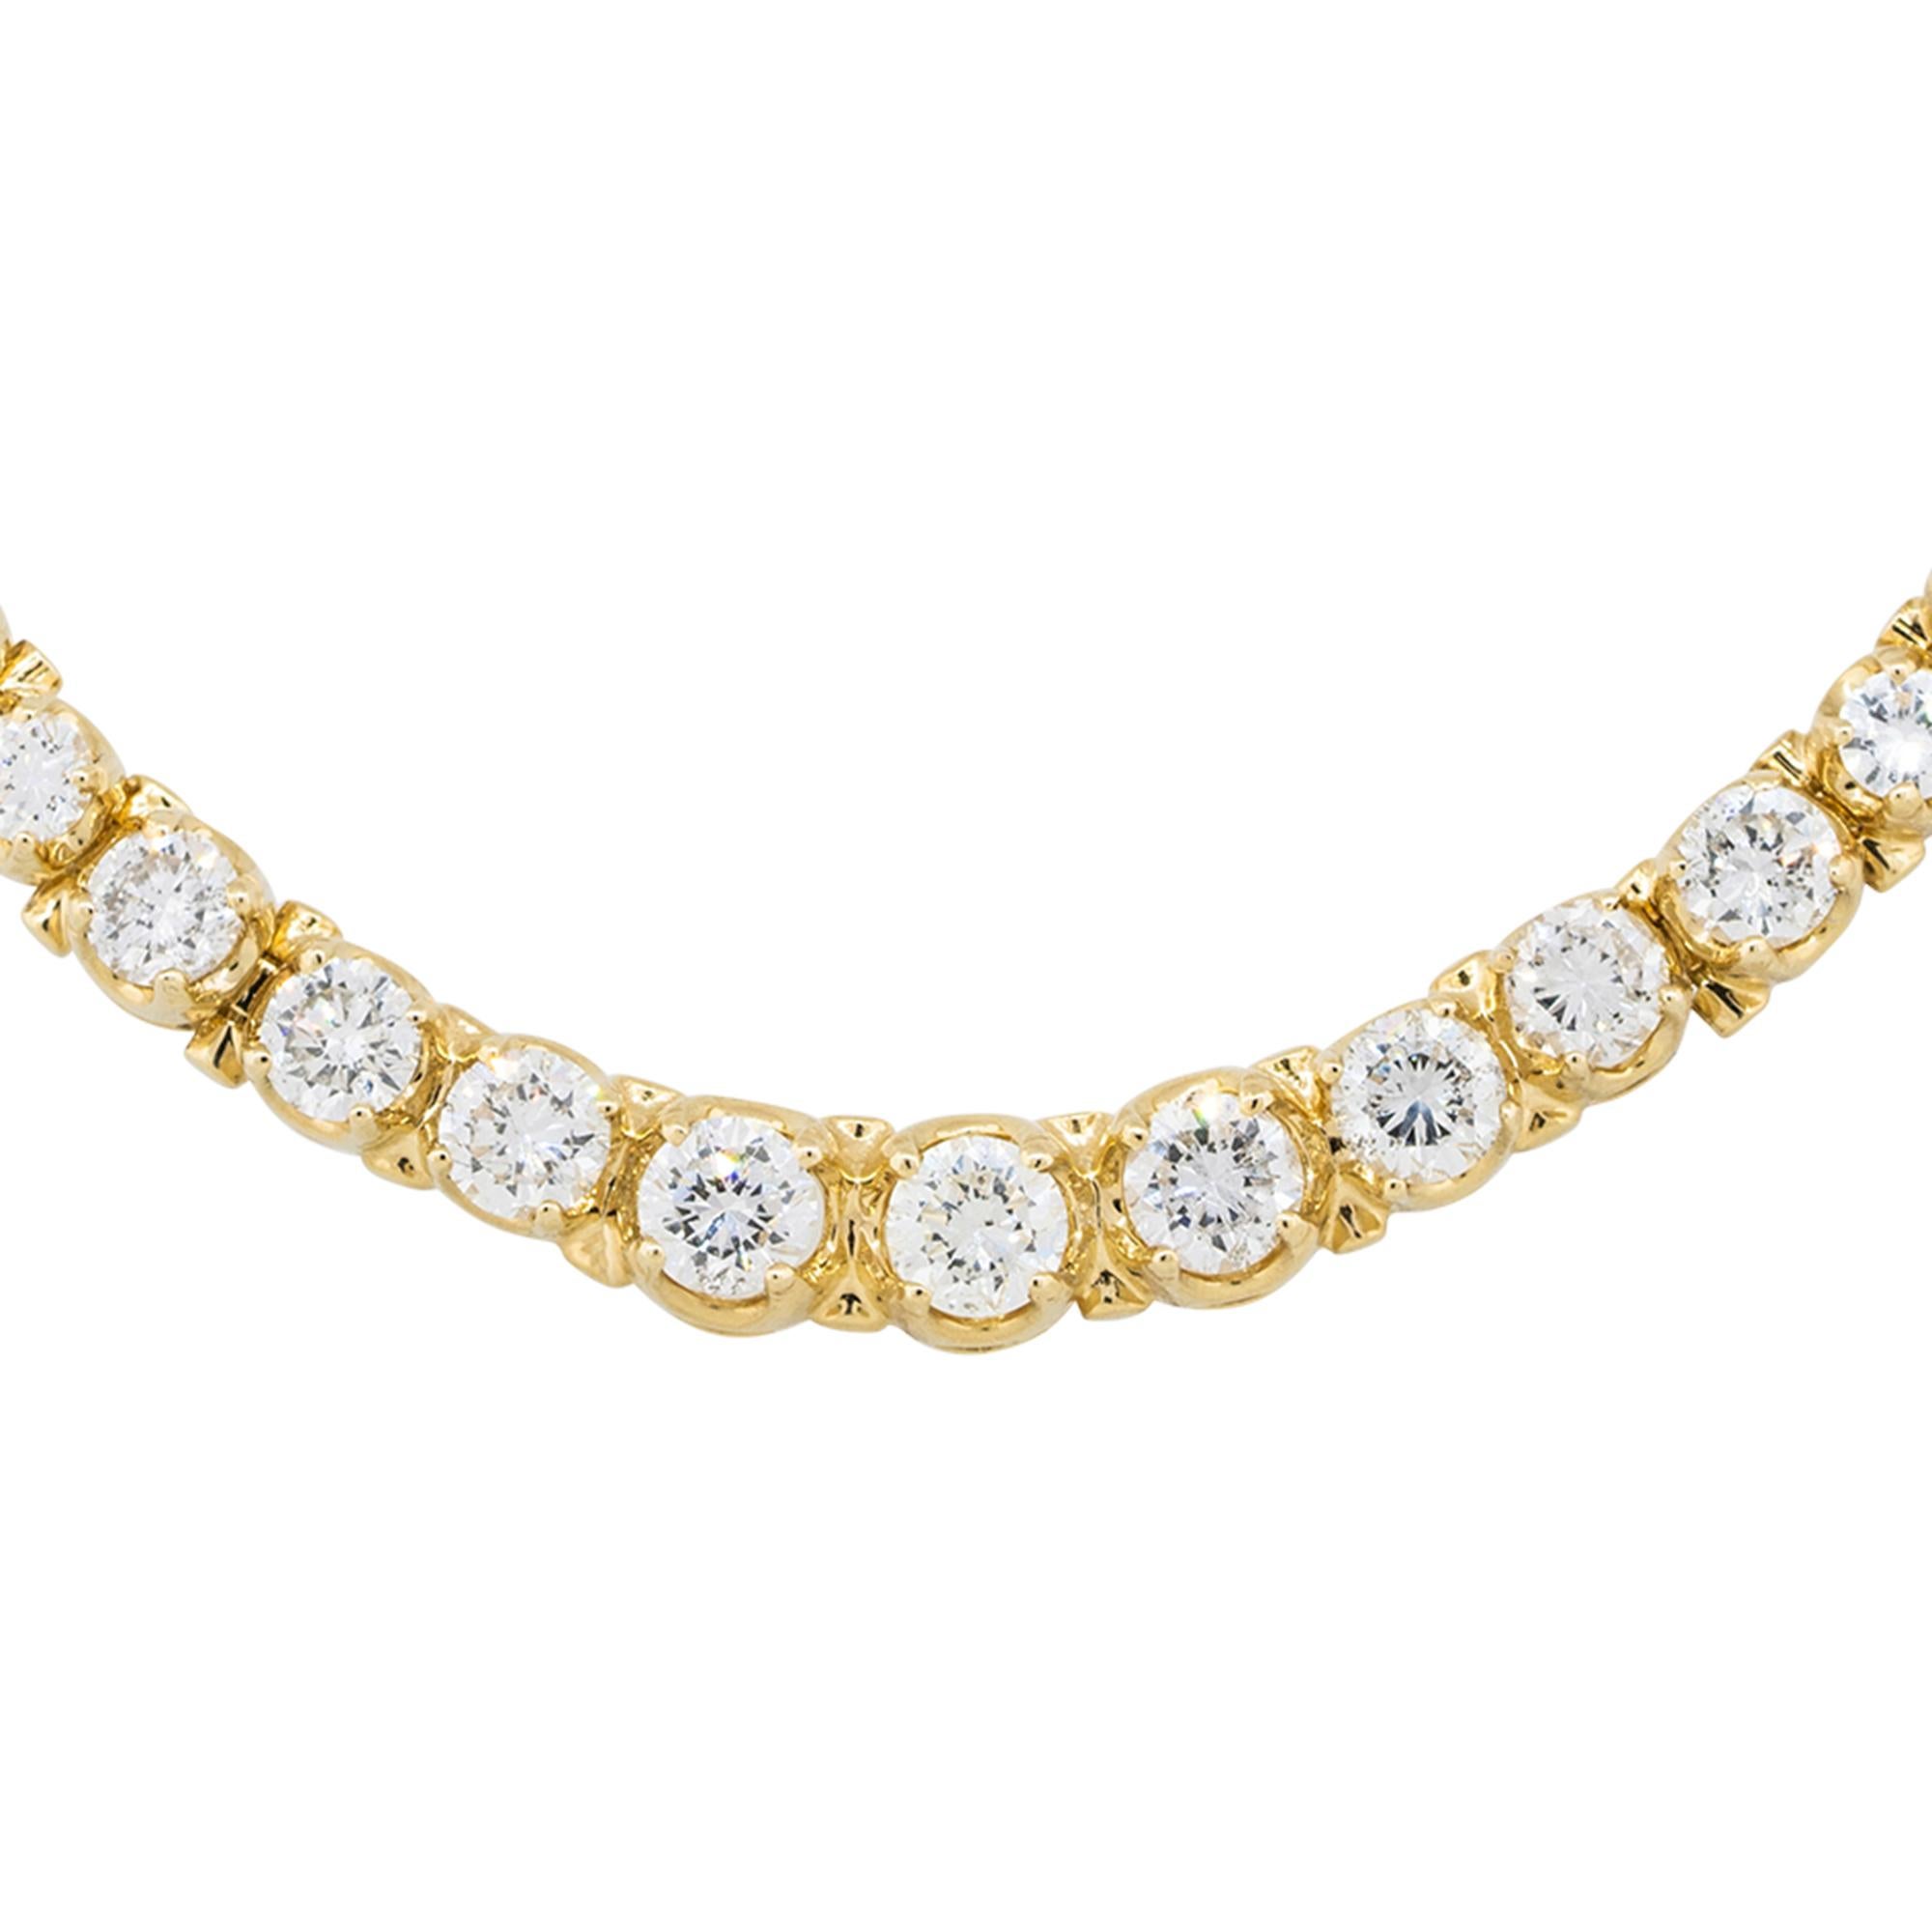 Material: 14k Yellow Gold
Diamond Details: Approx. 8.06ctw of graduated round cut Diamonds. Diamonds are G/H in color and VS in clarity
Clasps: Lobster clasp
Total Weight: 31.5g (20.2dwt) 
Length: 18